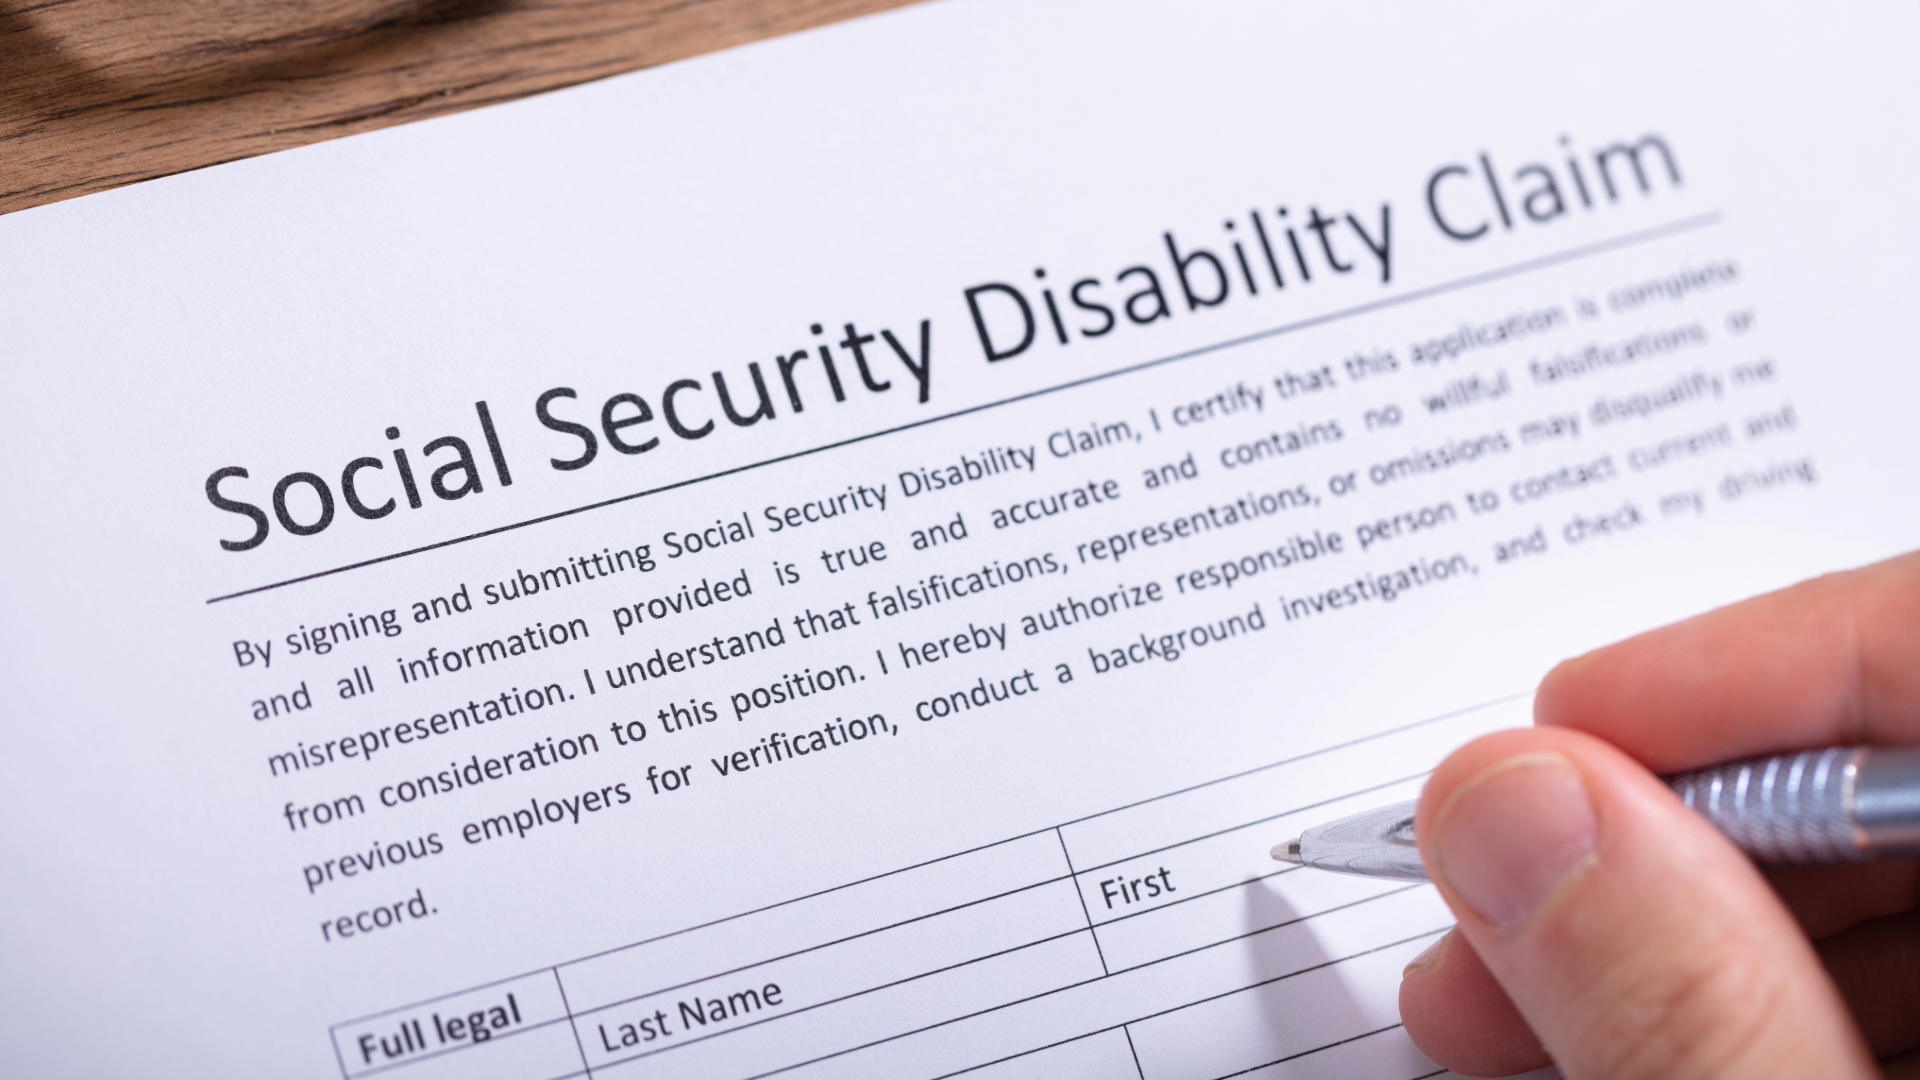 Tips when filing for Social Security Disability benefits